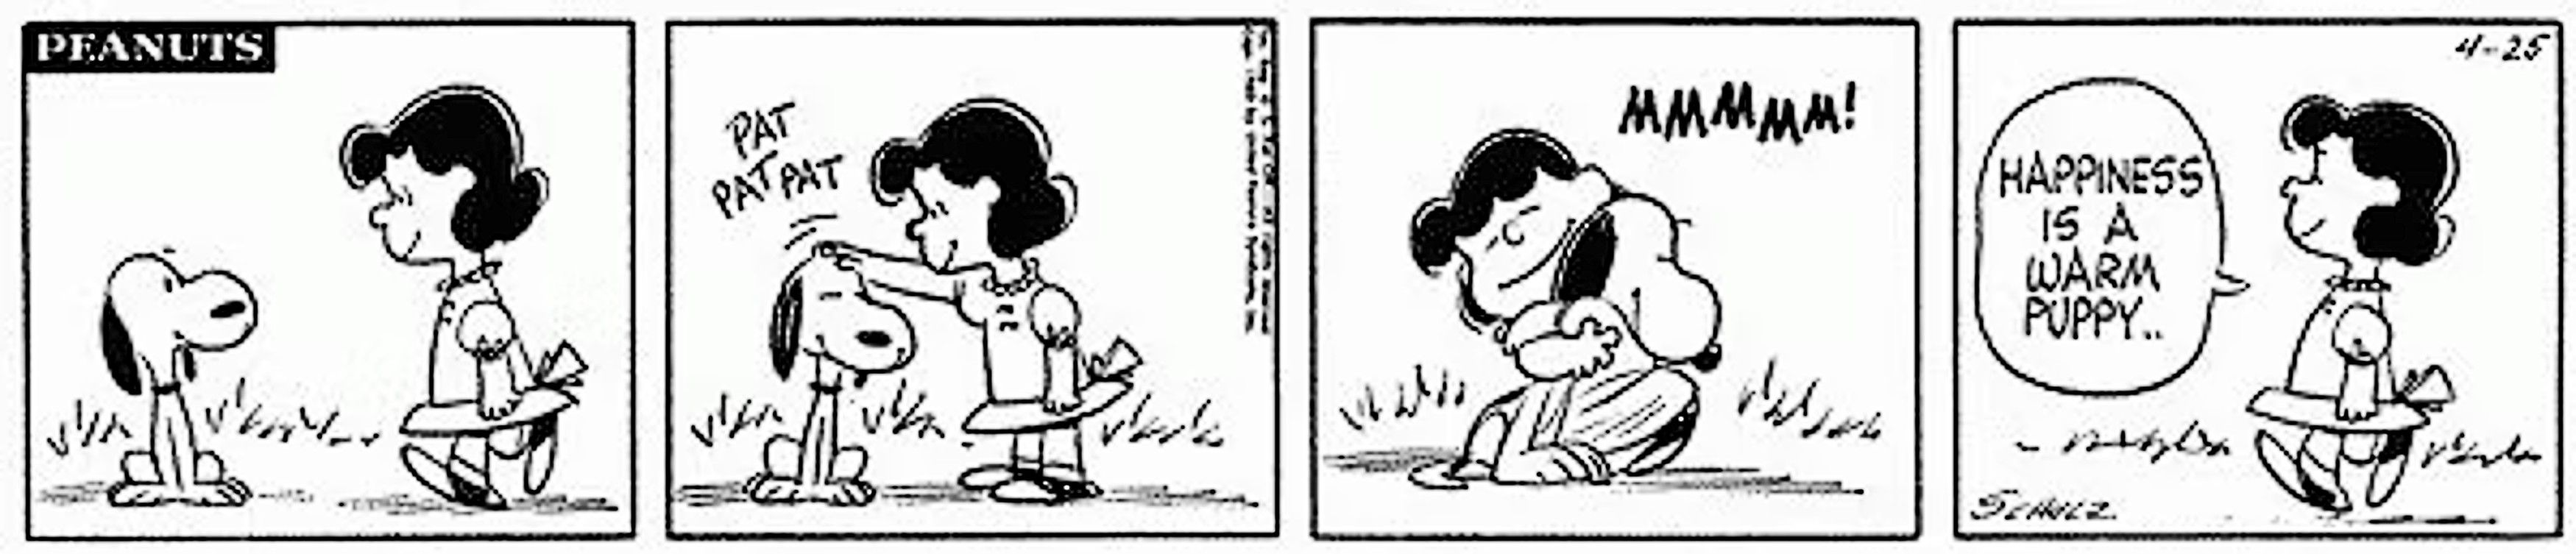 Peanuts, Lucy pets & hugs Snoopy, thinks "happiness is a warm puppy."